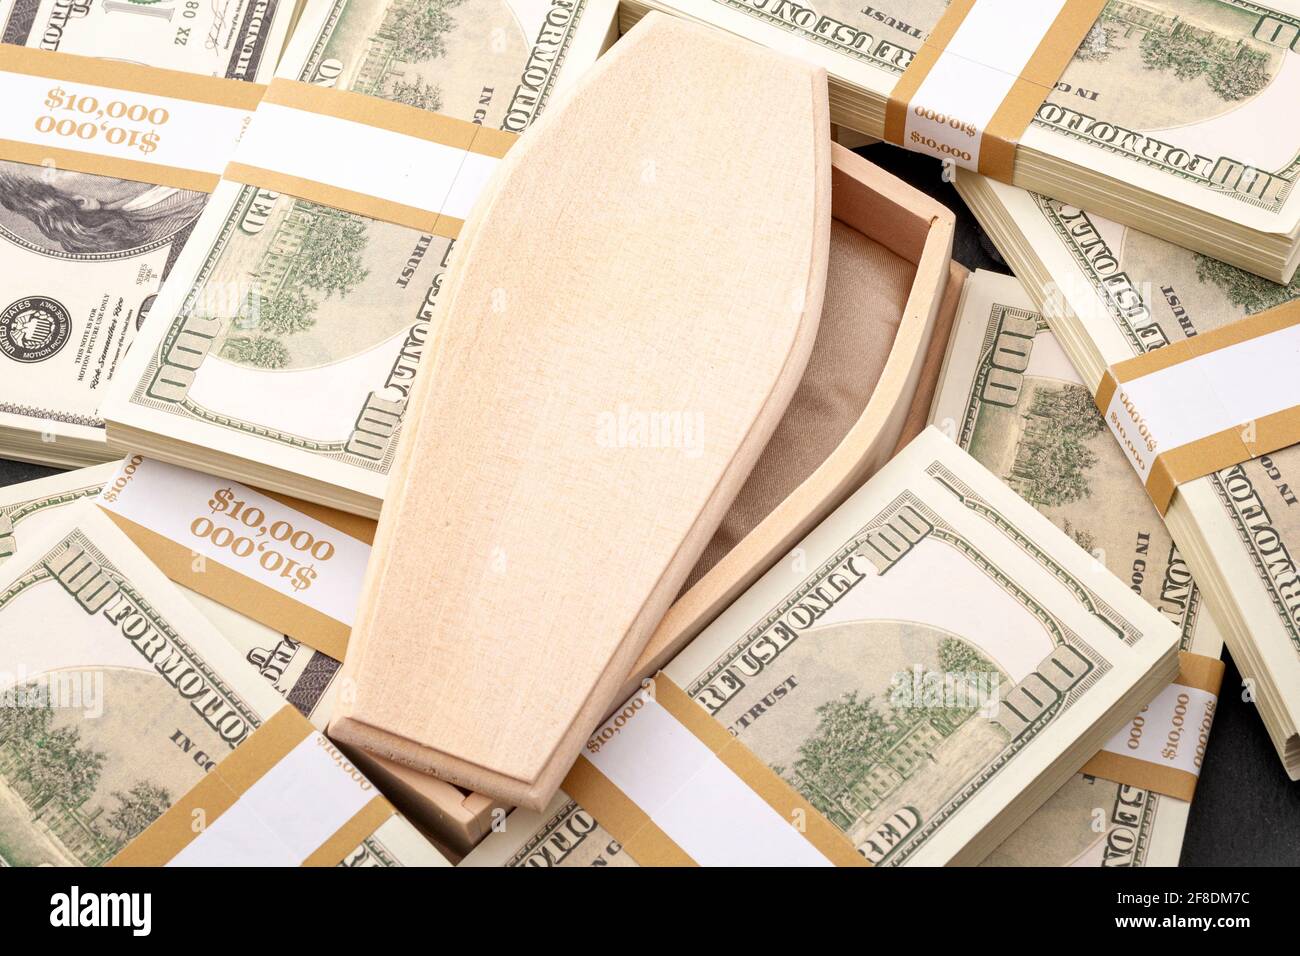 Buried in debt, funeral costs and money problems concept with close up on wooden coffin or casket and bundles of cash (US dollars) Stock Photo